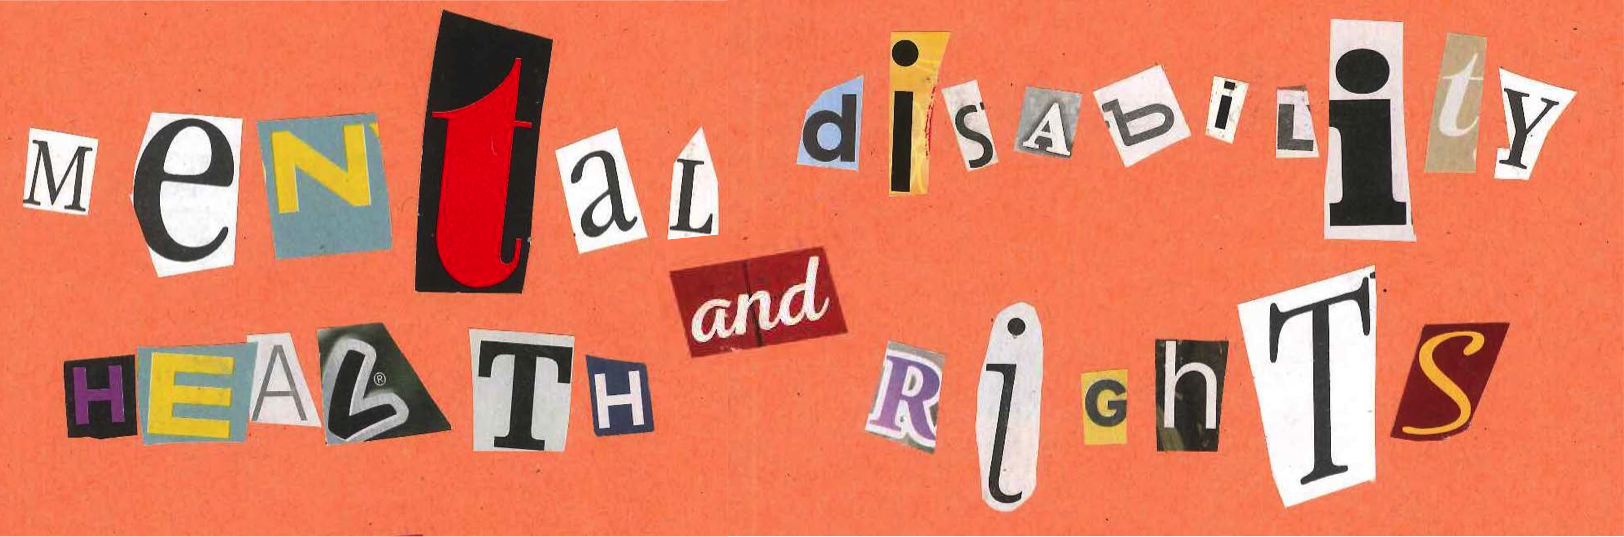 "Mental Health and Disability Rights" written in cutout letters